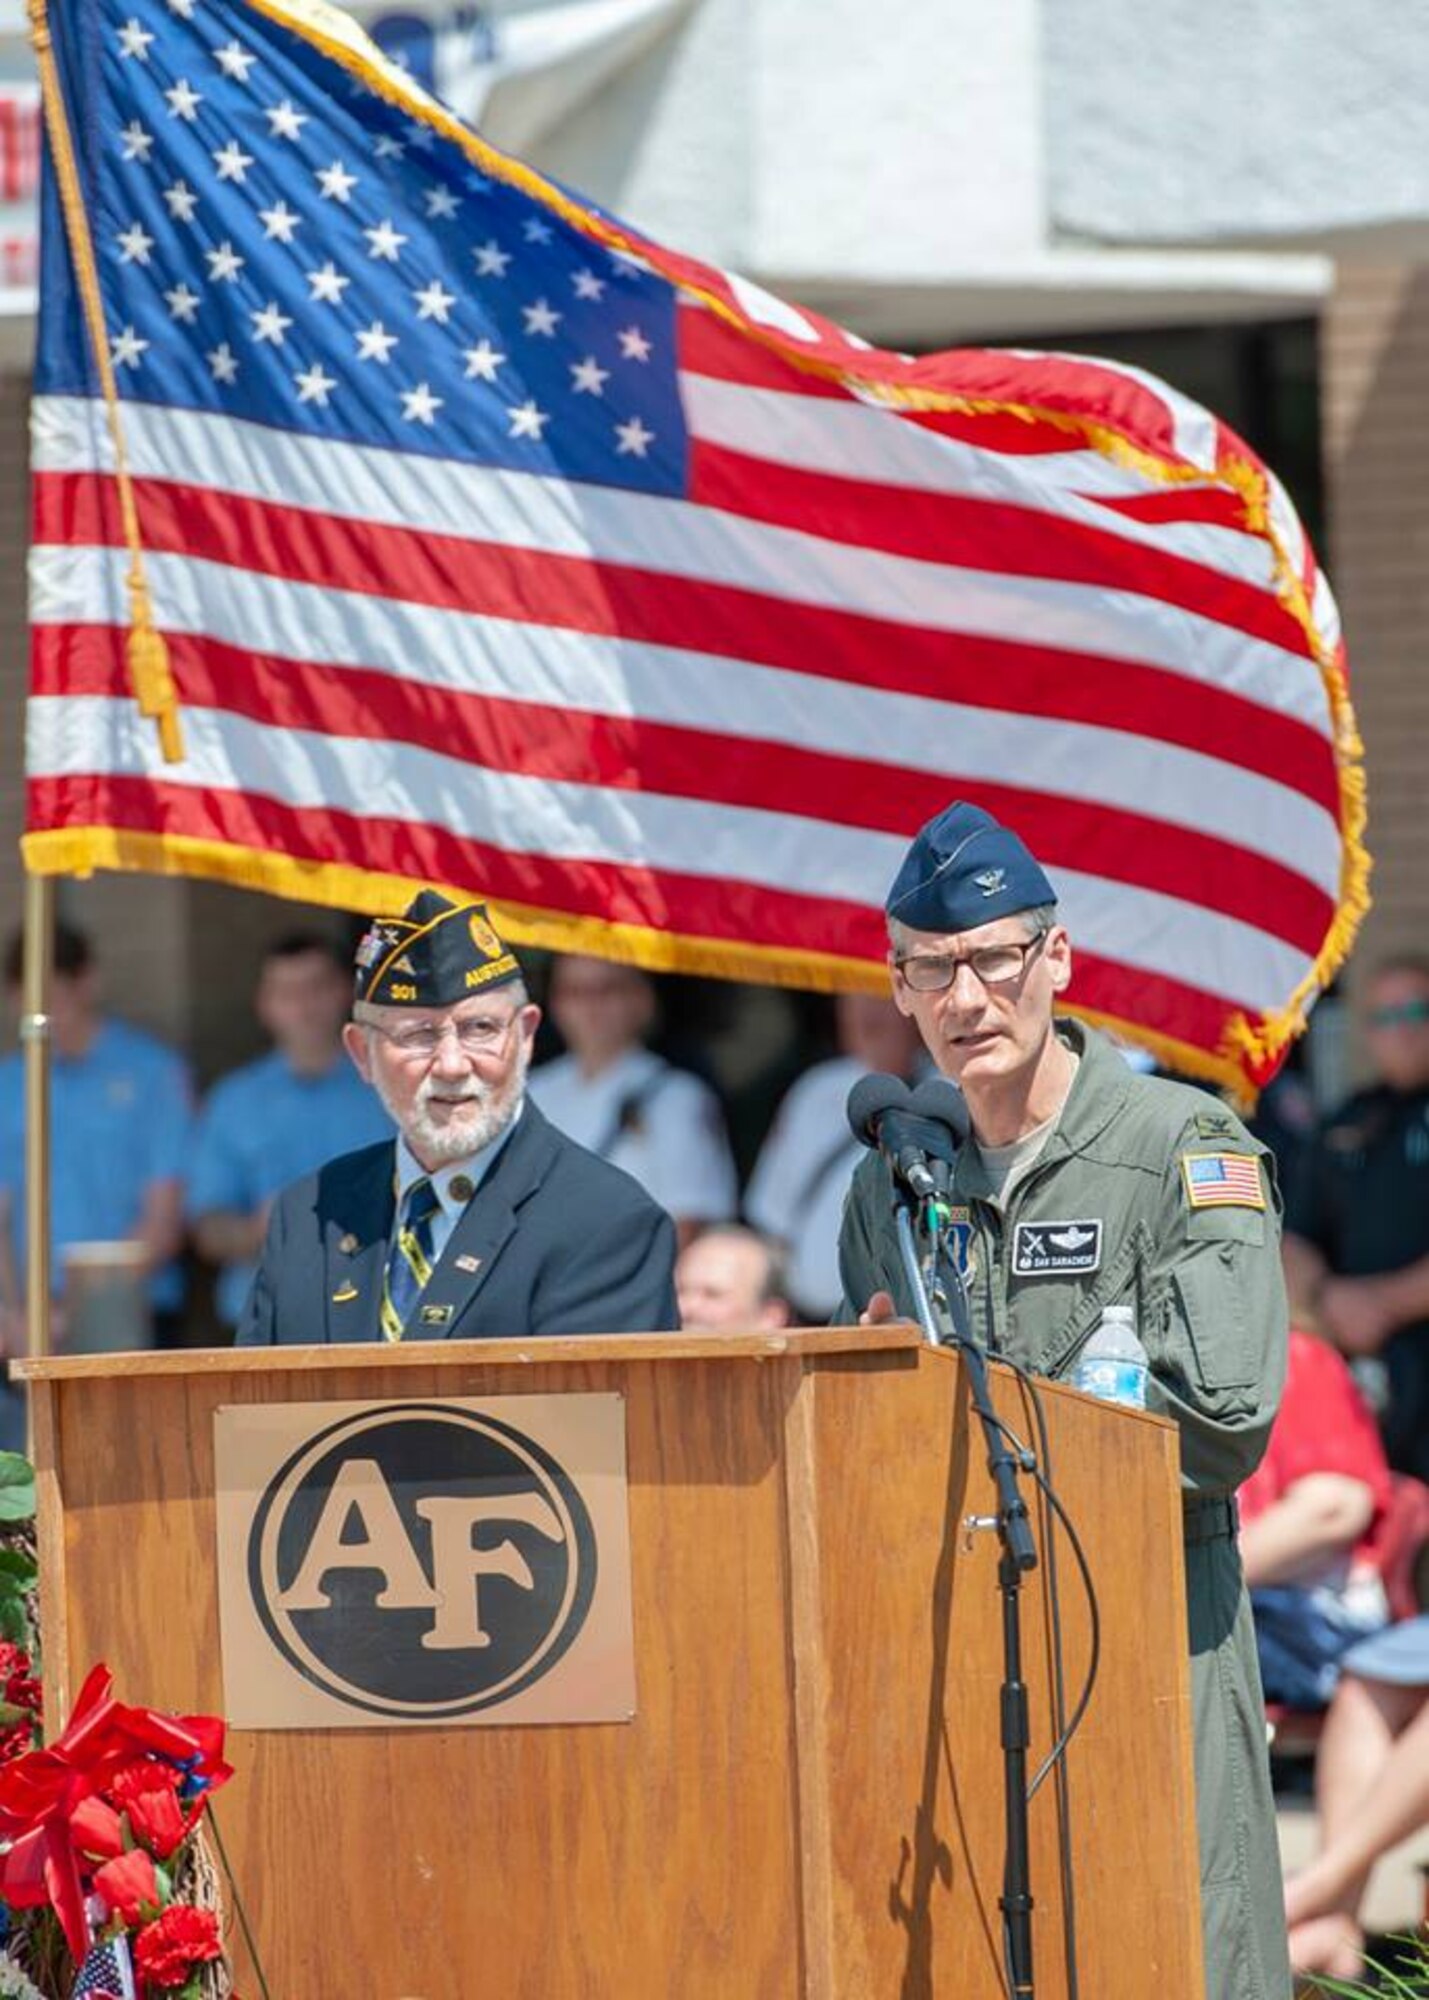 Col. Dan Sarachene, commander of the 910th Airlift Wing, based at Youngstown Air Reserve Station, Ohio, gives the keynote address at a Memorial Day ceremony in Austintown Township, May 28, 2018.